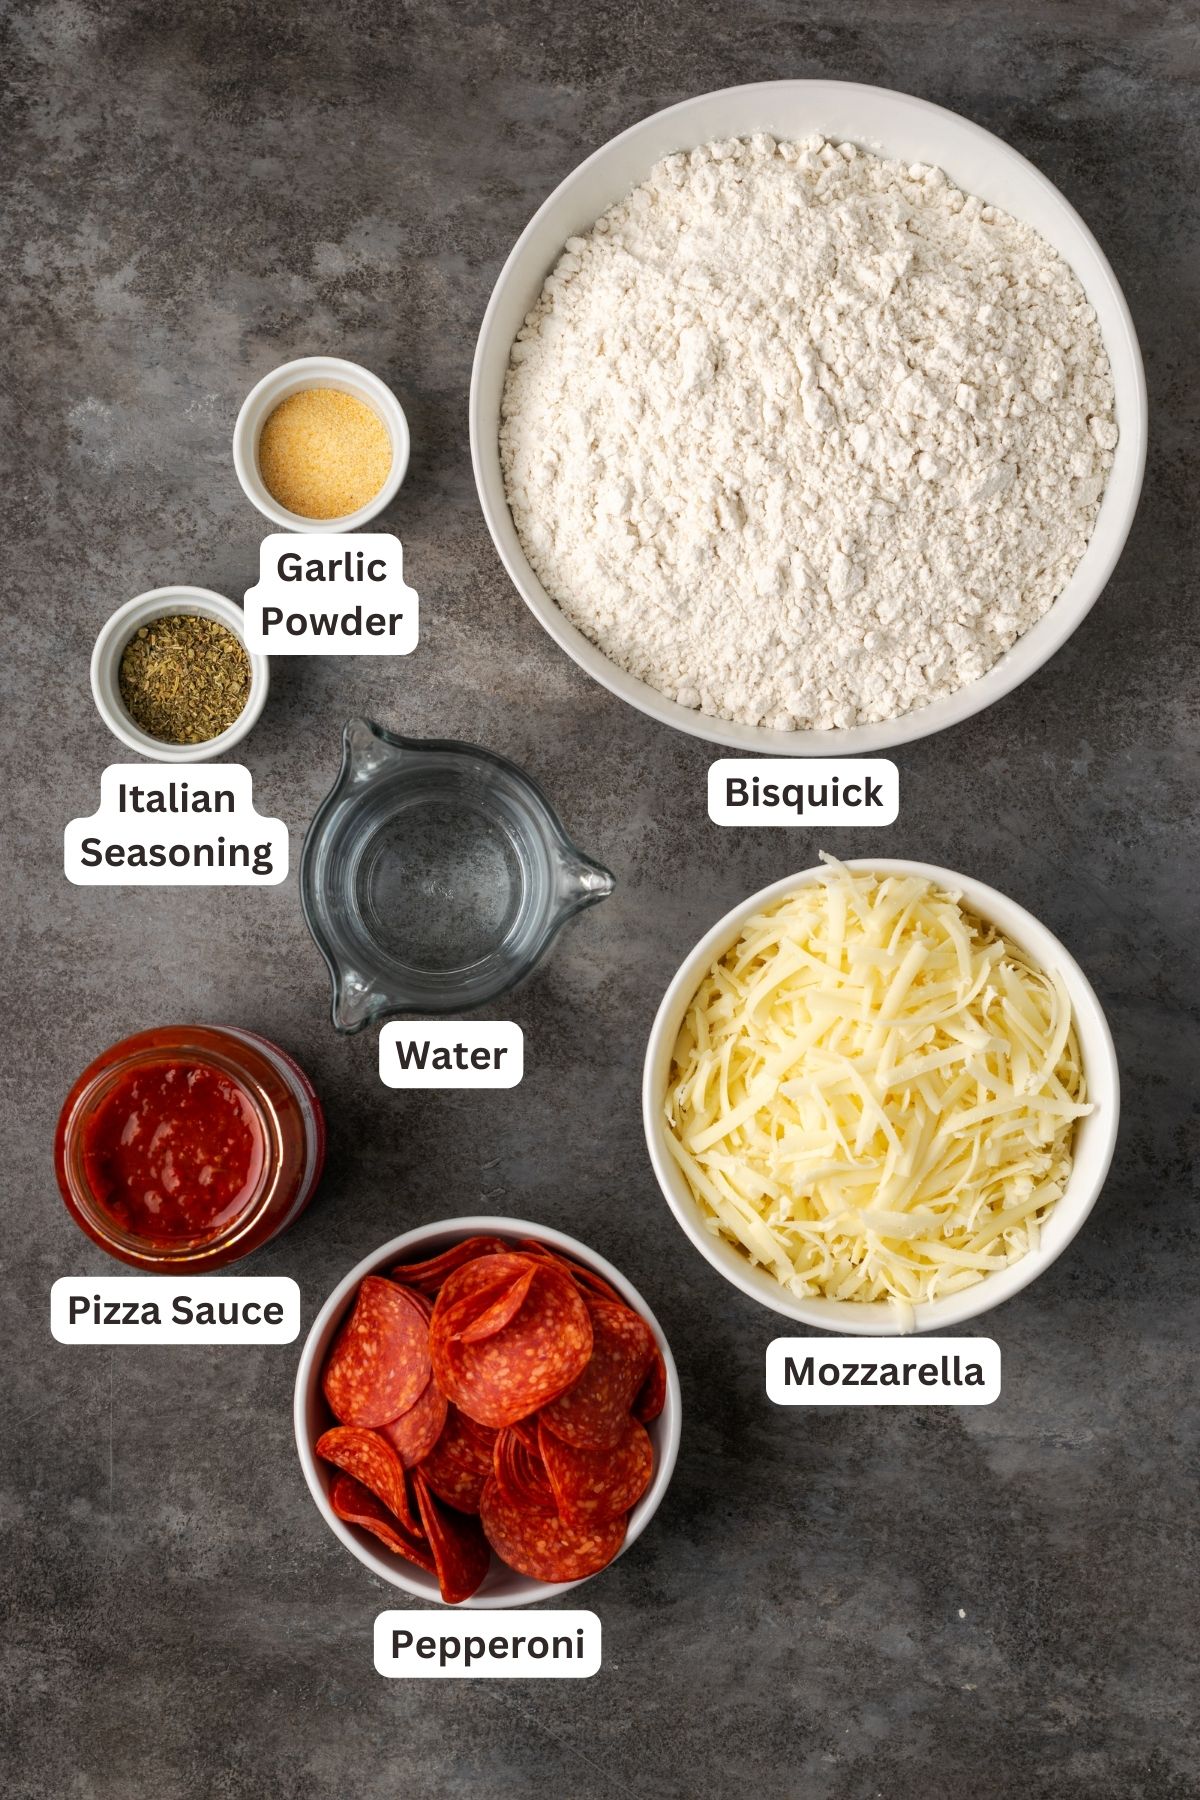 Pizza casserole ingredients with text labels overlaying each ingredient.